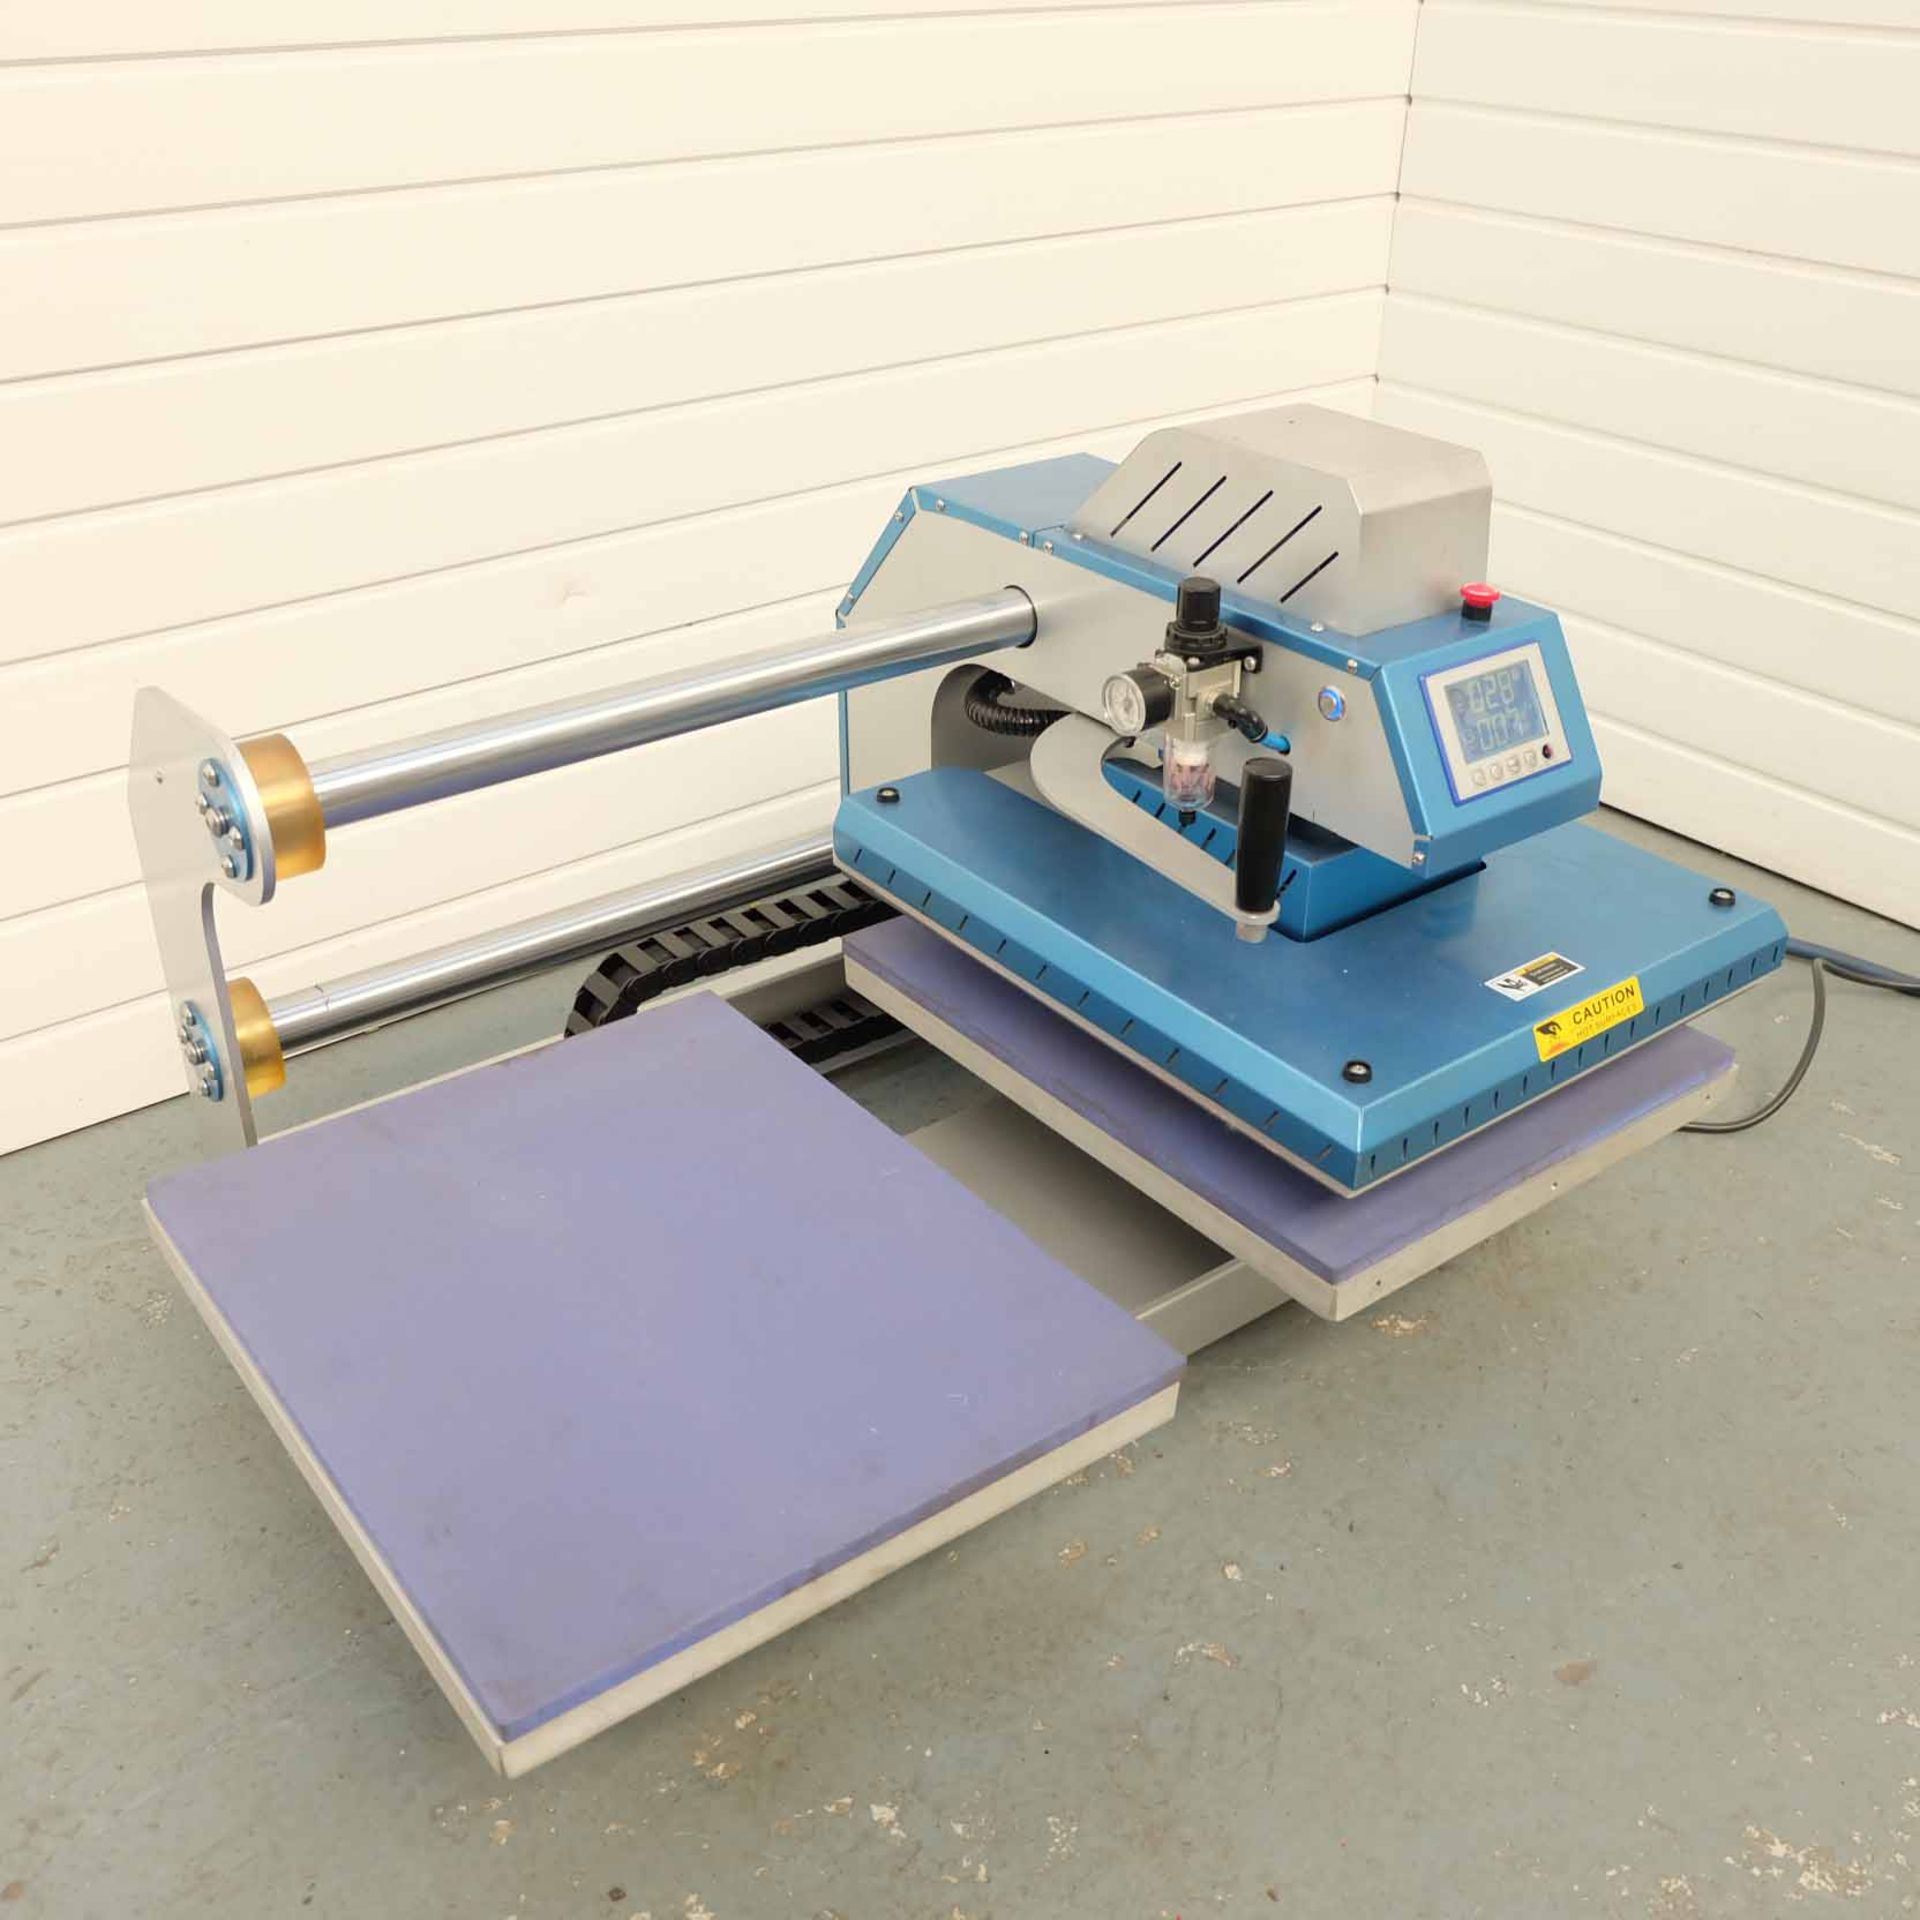 SYE Model HSQ Hot Foil Sublimation Machine / Heat Press. 2 x Heating Plates. Plate Size 400mm x 500m - Image 4 of 10